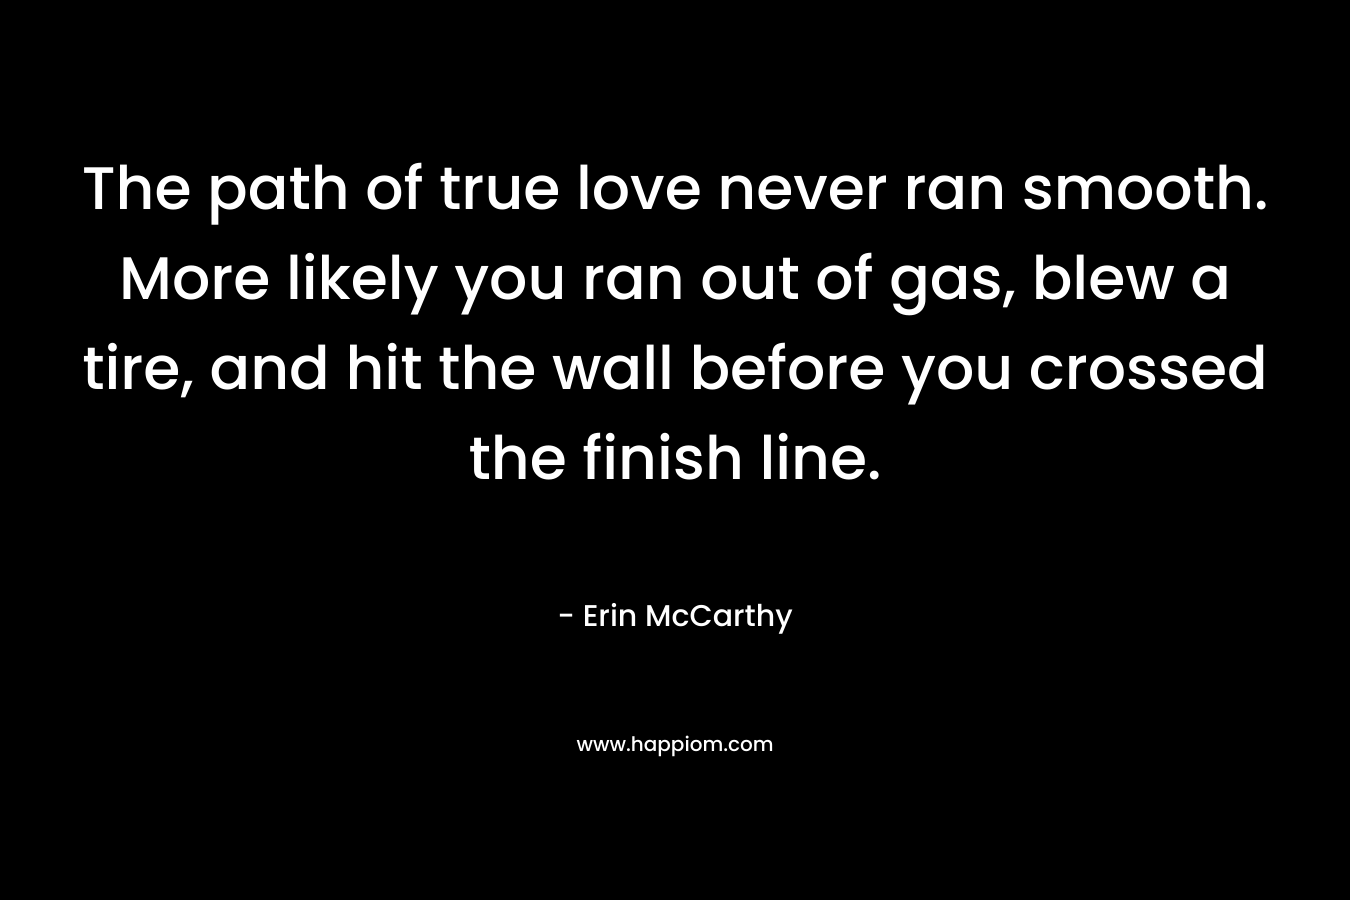 The path of true love never ran smooth. More likely you ran out of gas, blew a tire, and hit the wall before you crossed the finish line.